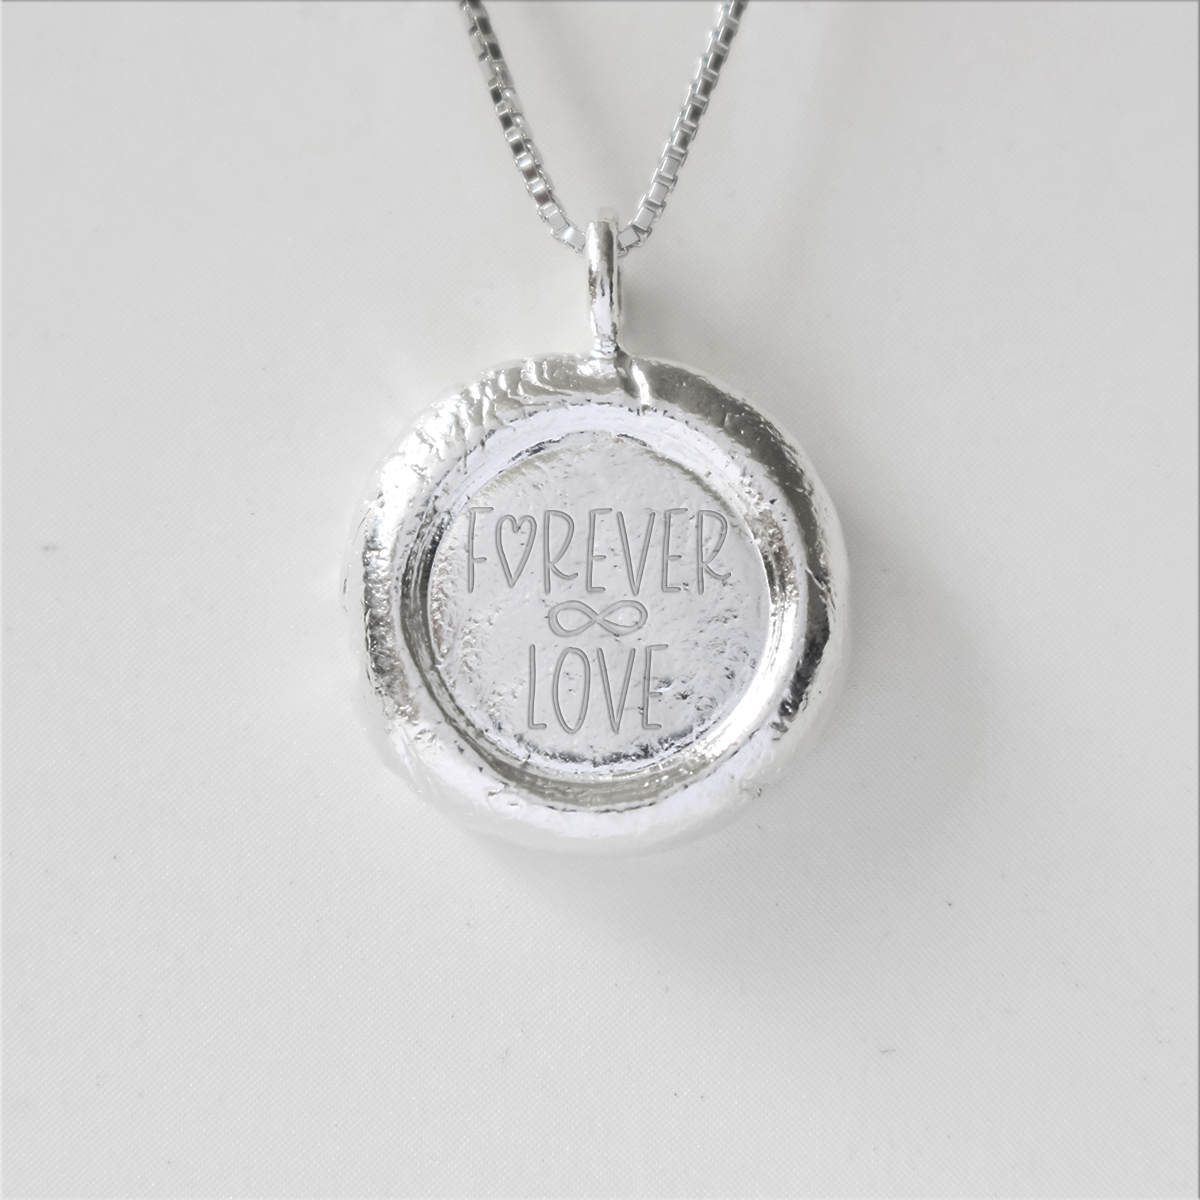 Forever Love - Empowerment Diamond Silver Necklace / Wedding Gift / Valentine's Gift